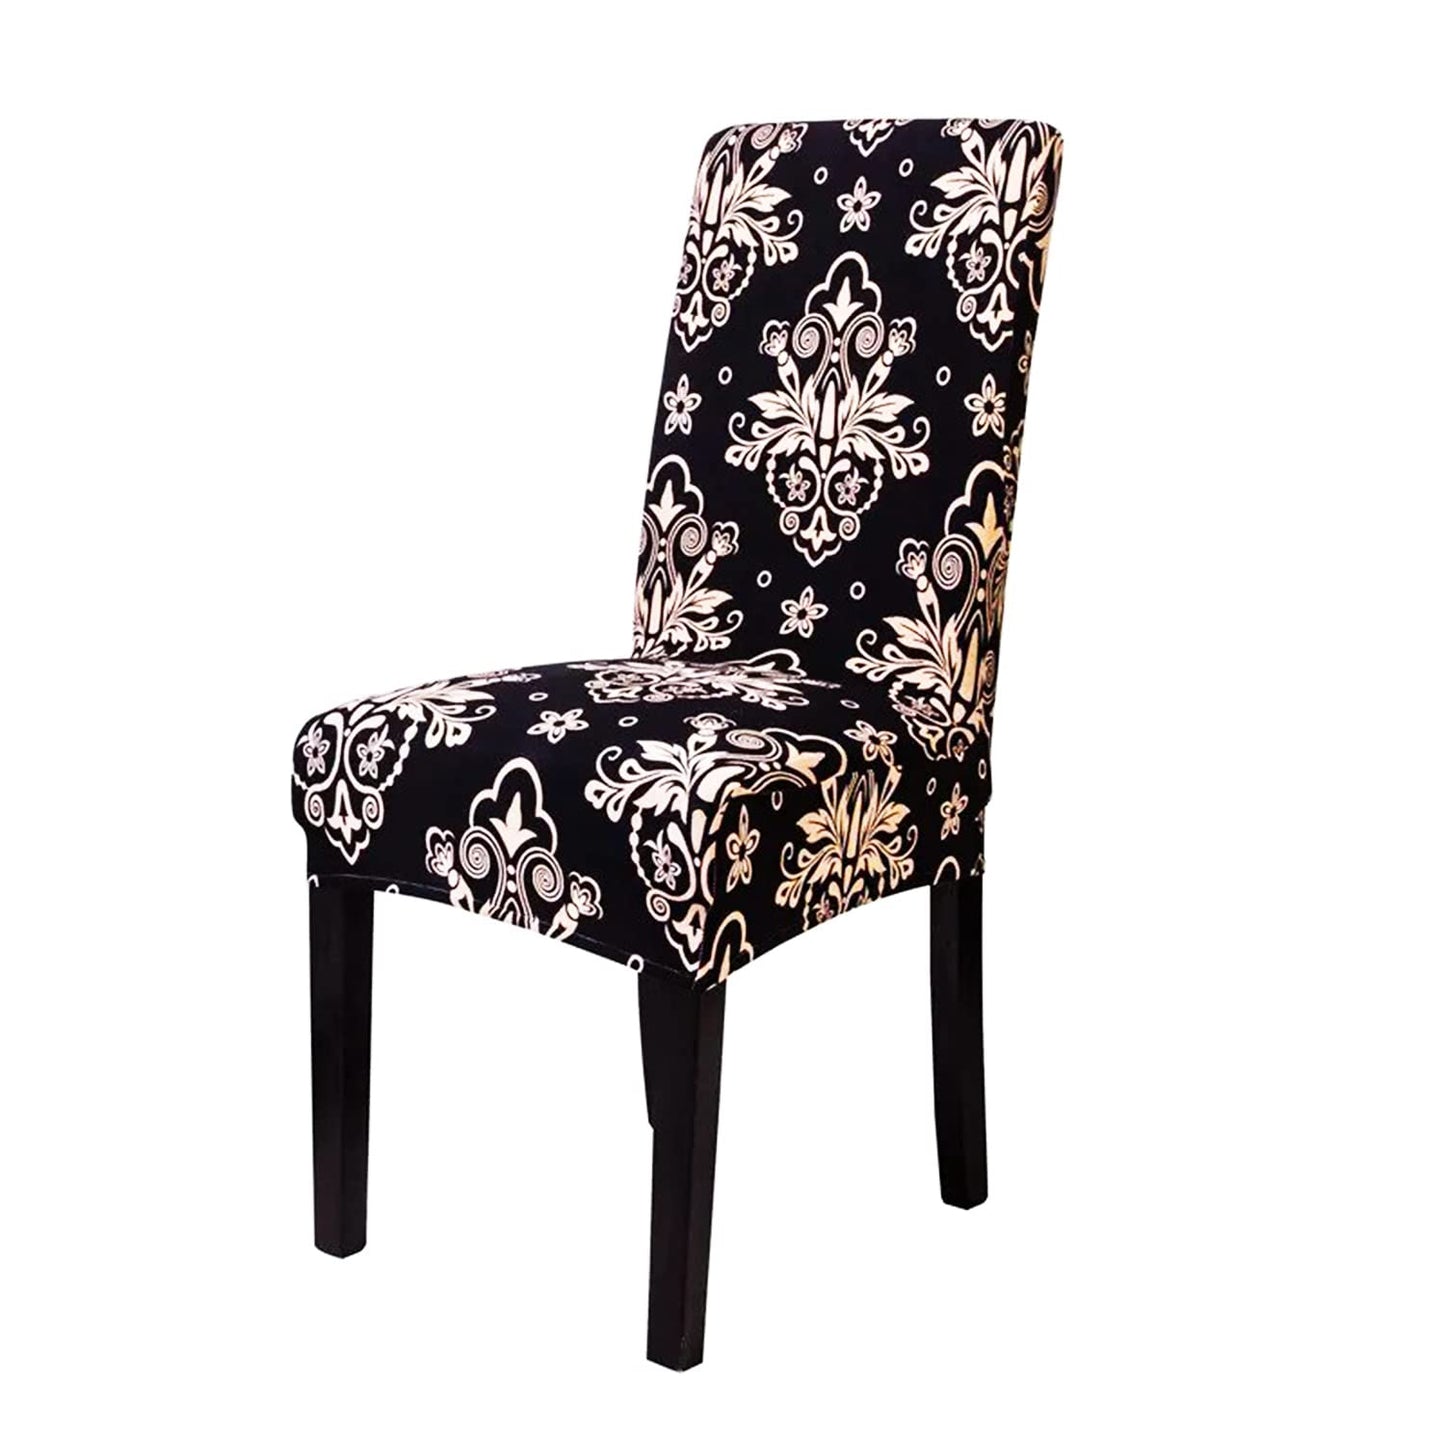 Floral Elastic Chair Cover (Cambric Black)